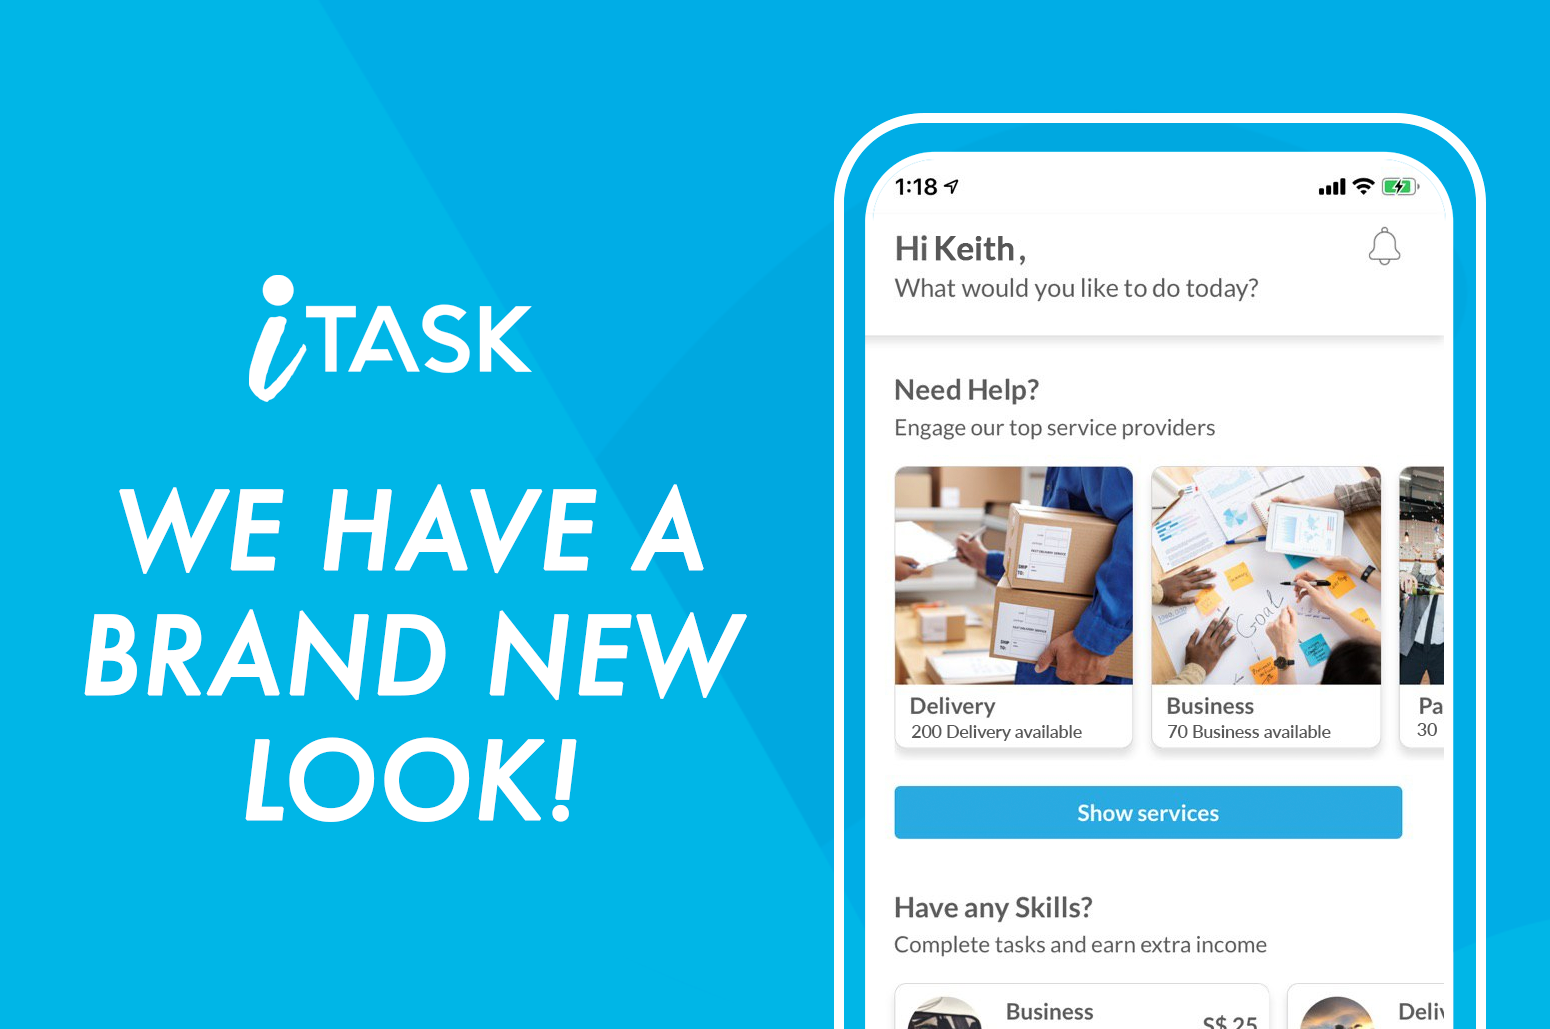 iTask gets a brand new look!